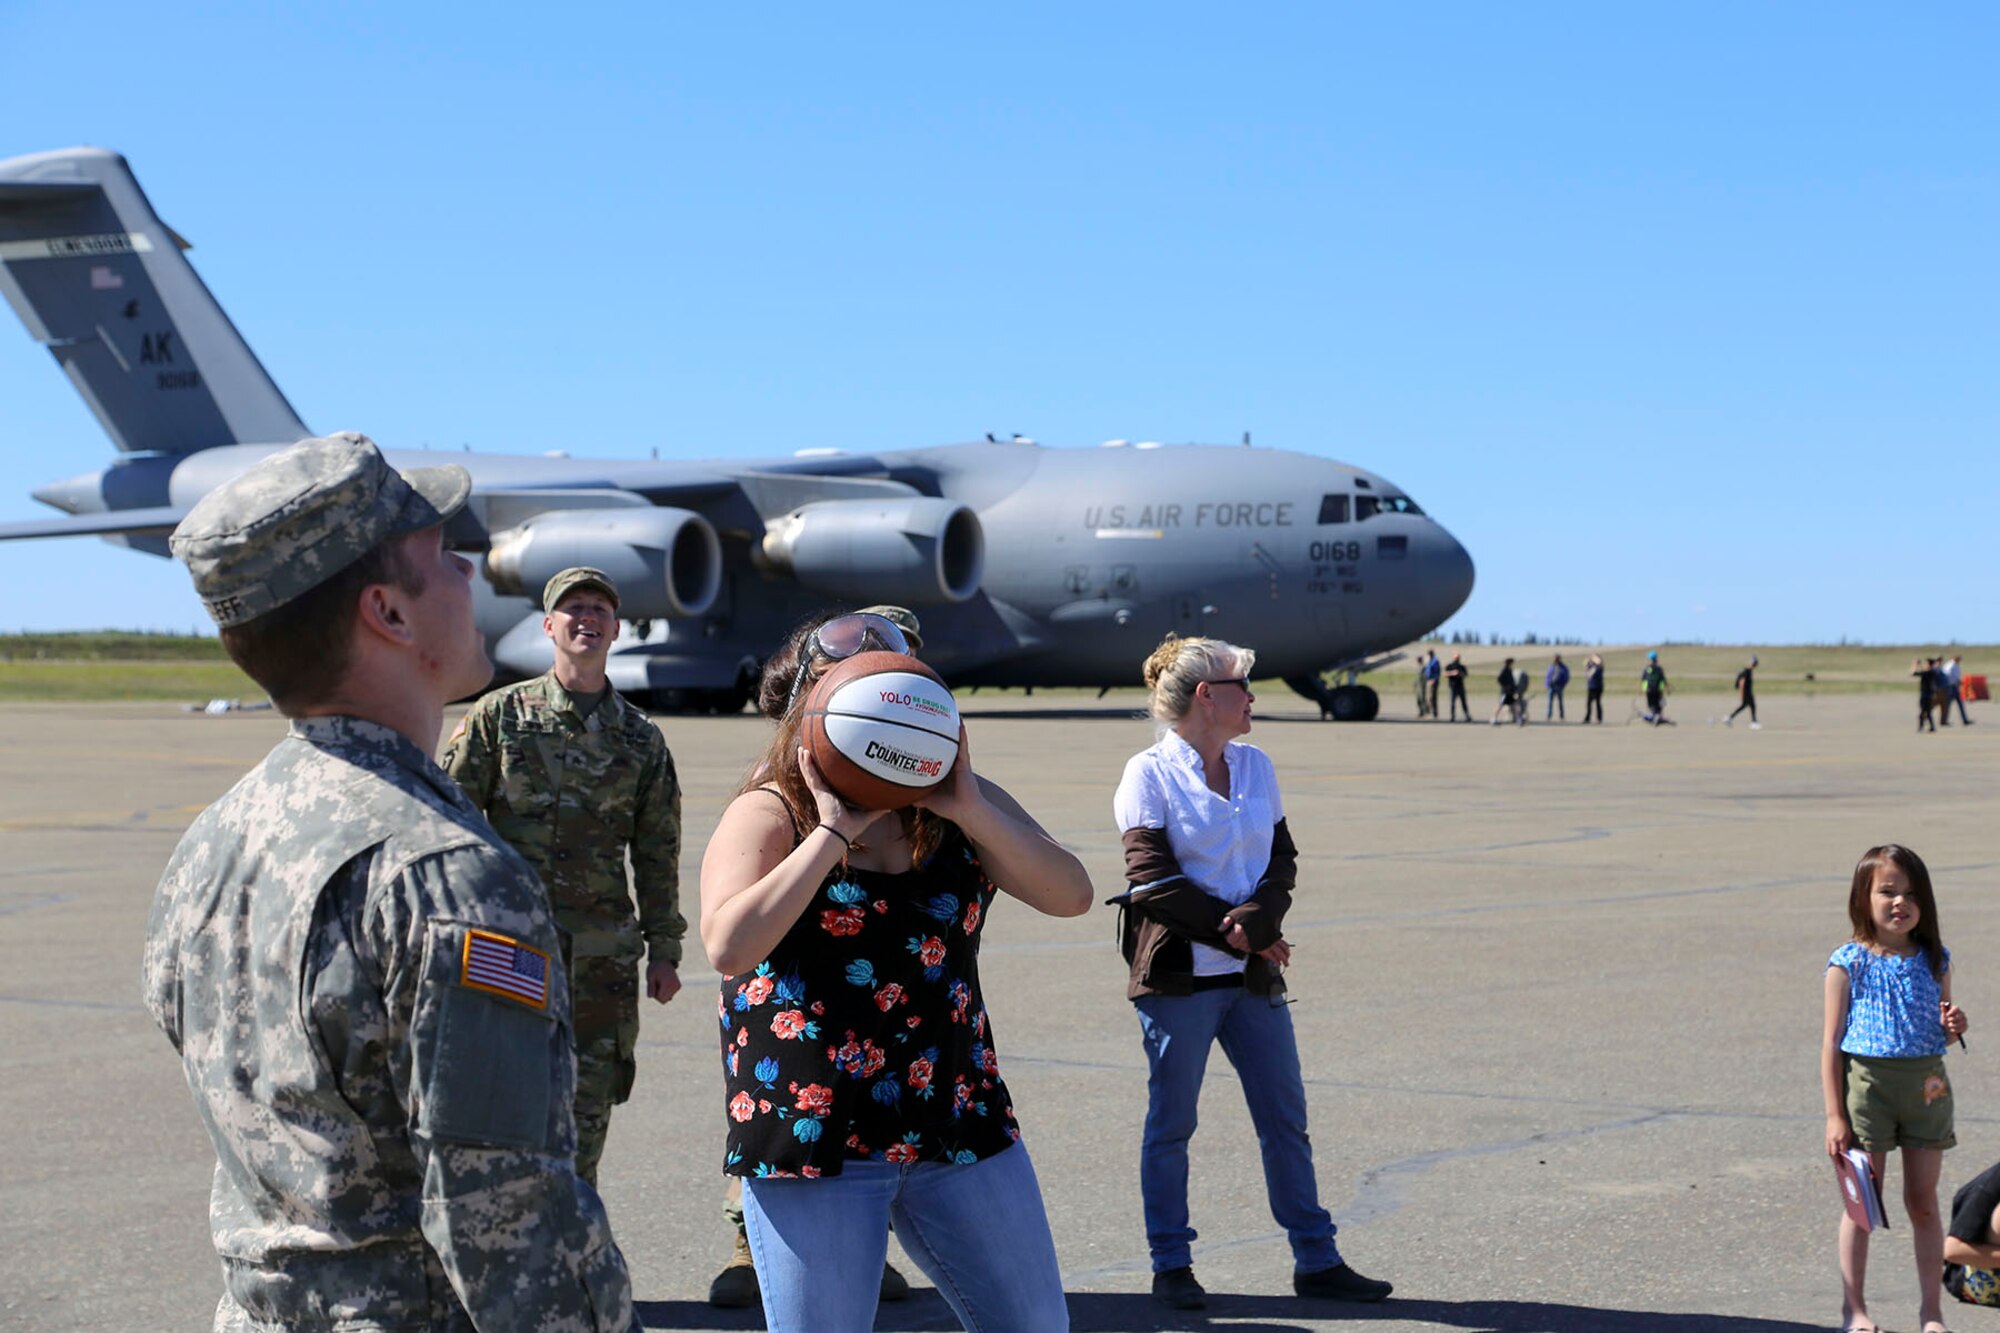 Alaska National Guard Warrant Officer Josiah Streff, left, and Sgt. Austin Makowski, both with the Counterdrug Support Program, watch as a local resident tries to shoot a basketball into a hoop while wearing vision impairment goggles at the Edward G. Pitka Sr. Airport in Galena, Alaska, May 31, 2017. The CDSP presented the goggles, a tool used to demonstrate alcohol or drug impairment, and provided drug and alcohol education and prevention materials to local residents during a recent civil operations mission in the Yukon-Koyukuk Region. (U.S. Army National Guard photo by Staff Sgt. Balinda O’Neal Dresel)